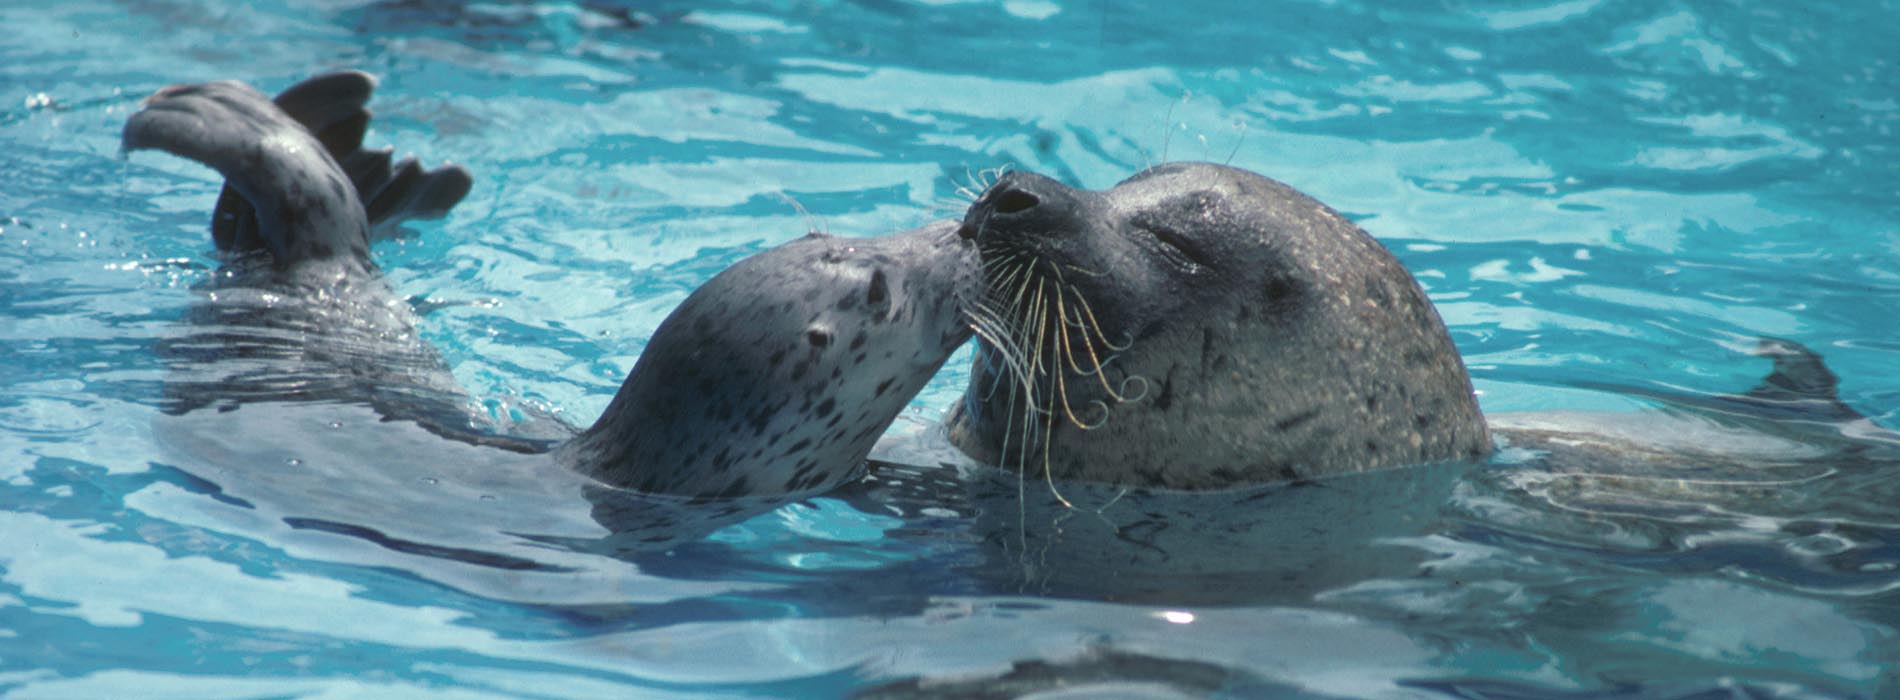 A baby harbor seal kisses an adult harbor seal in blue water